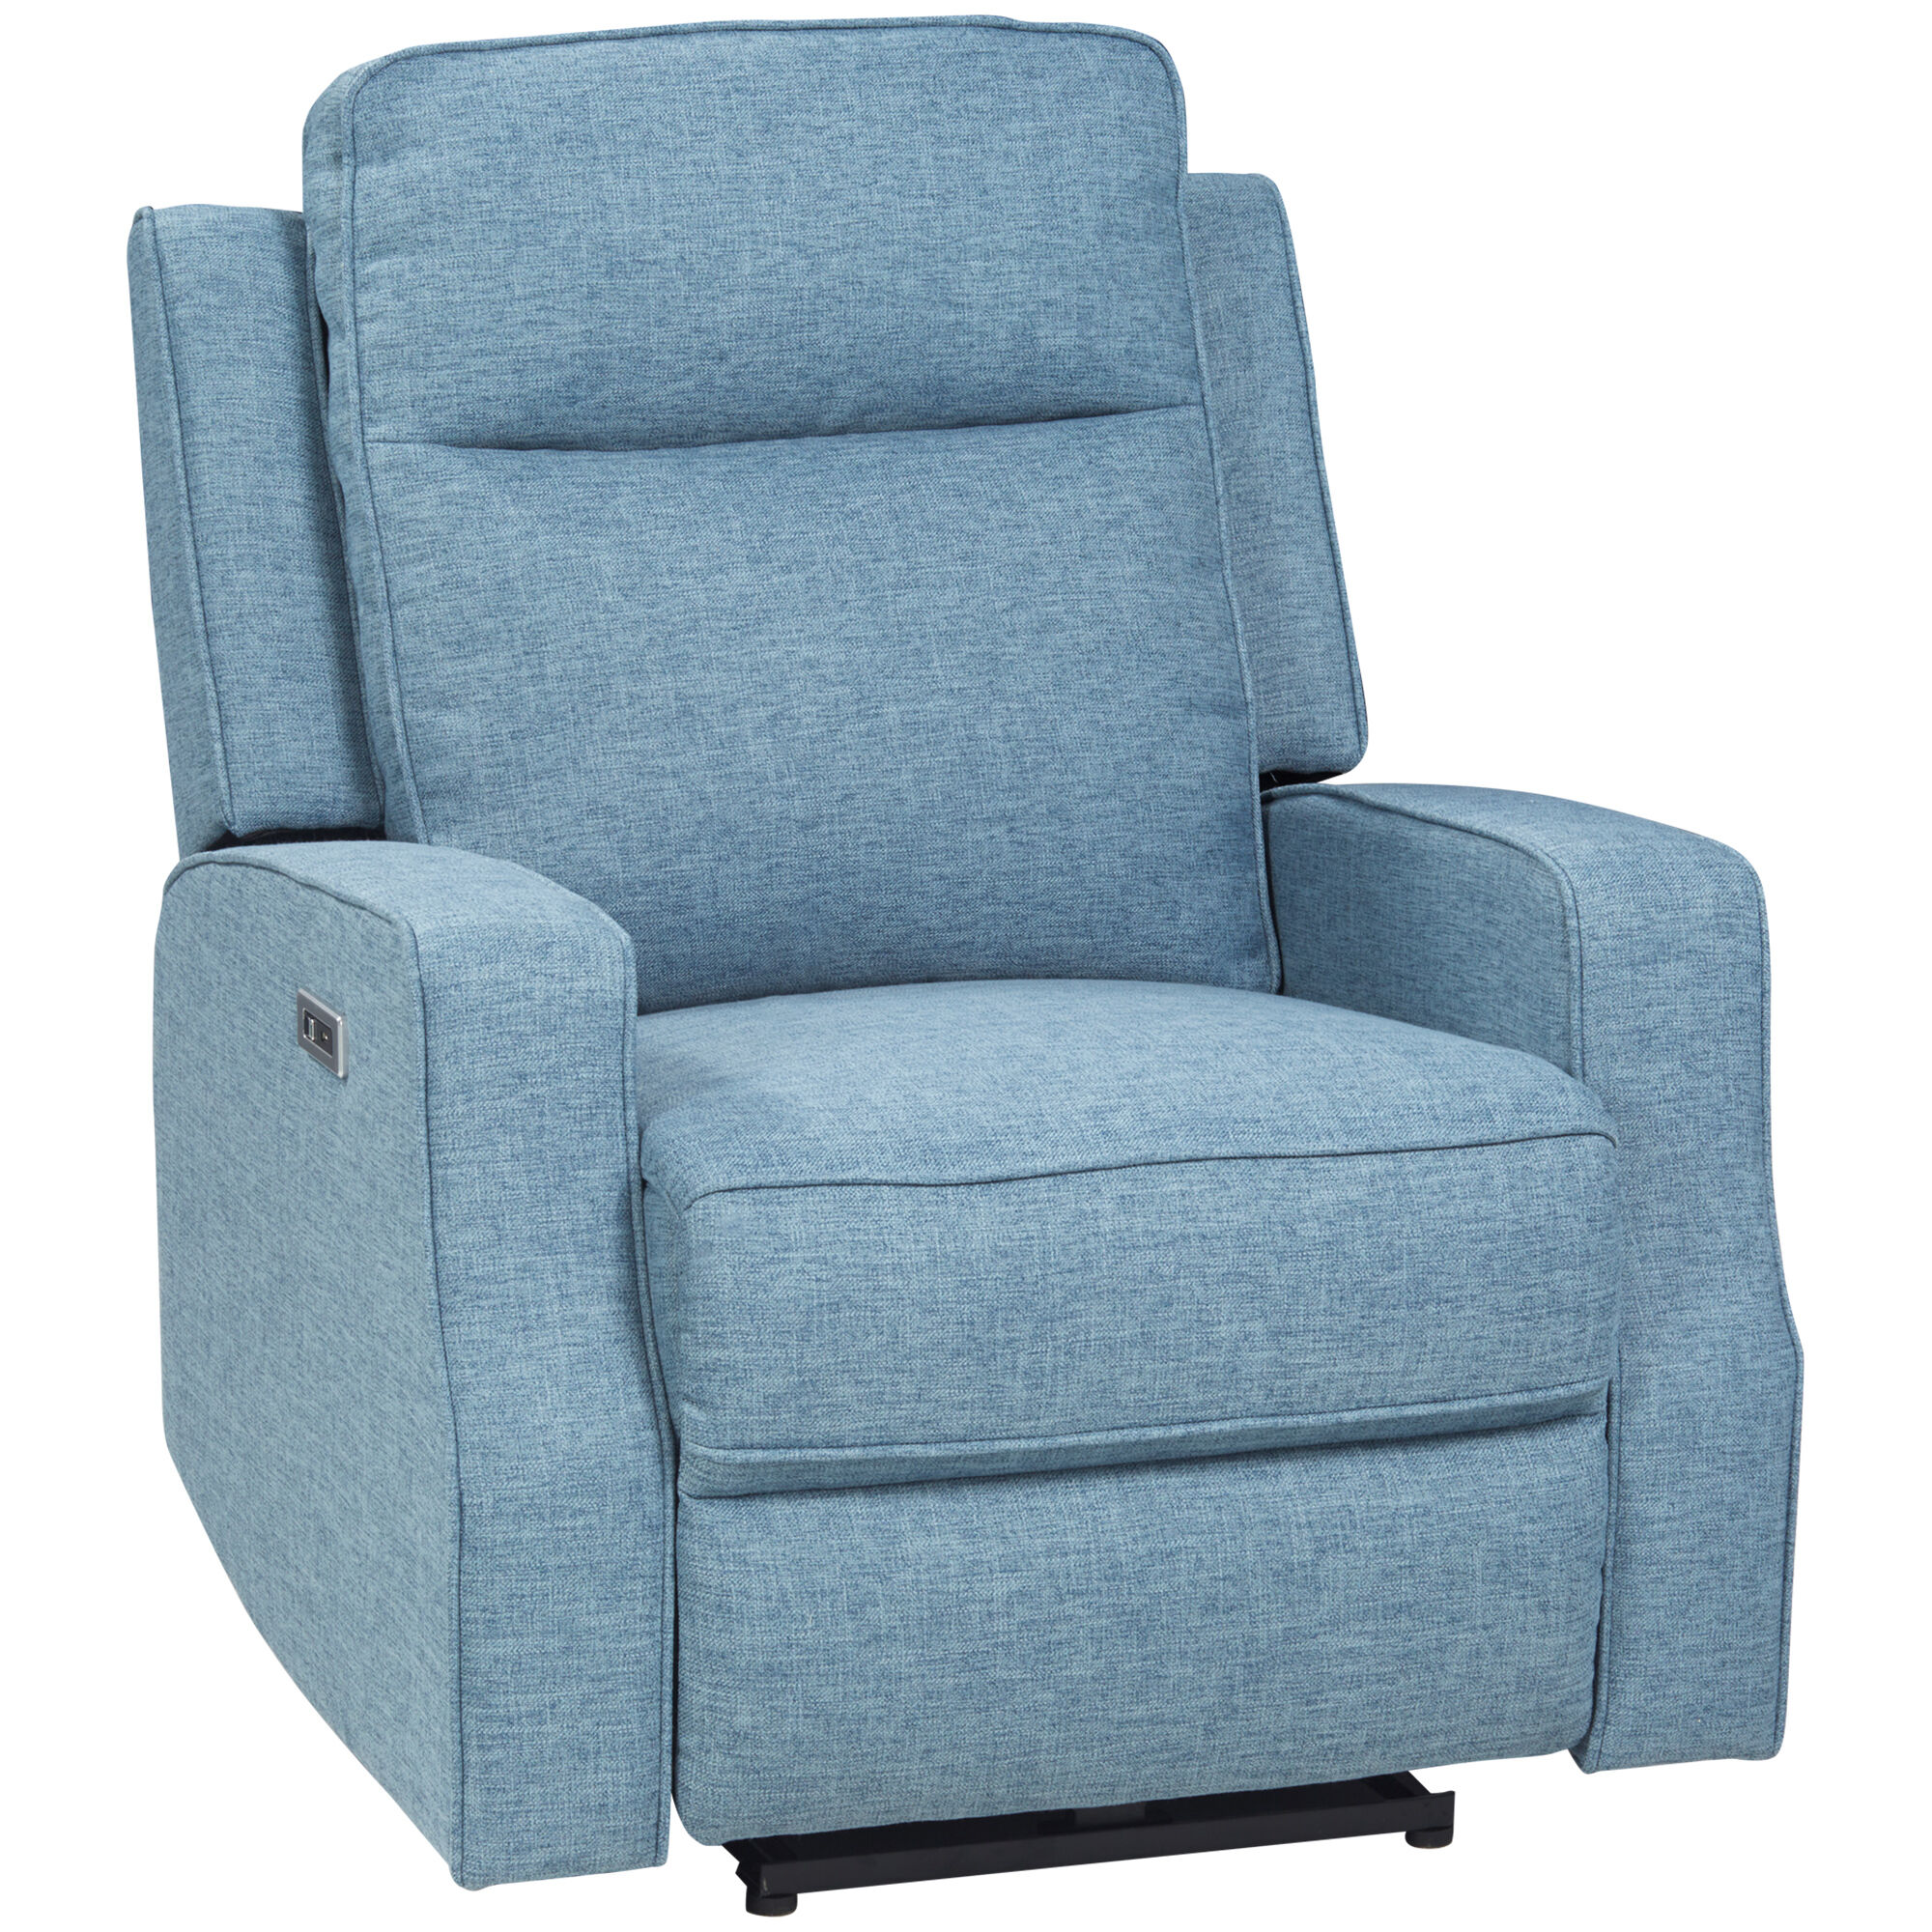 HOMCOM Electric Power Recliner, Wall Hugger Recliner Chair Armchair Sofa with Linen Upholstered Seat & Retractable Footrest, Blue